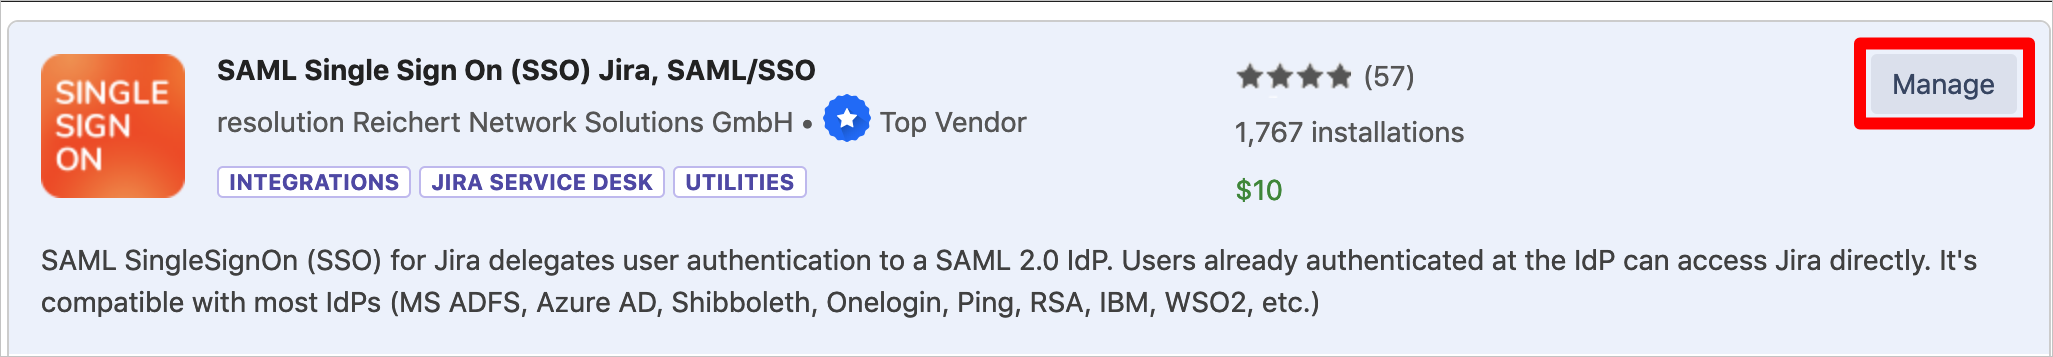 Screenshot that shows the "S A M L Single Sign On (S S O) Jira, S A M L/S S O" app with the "Manage" button selected.